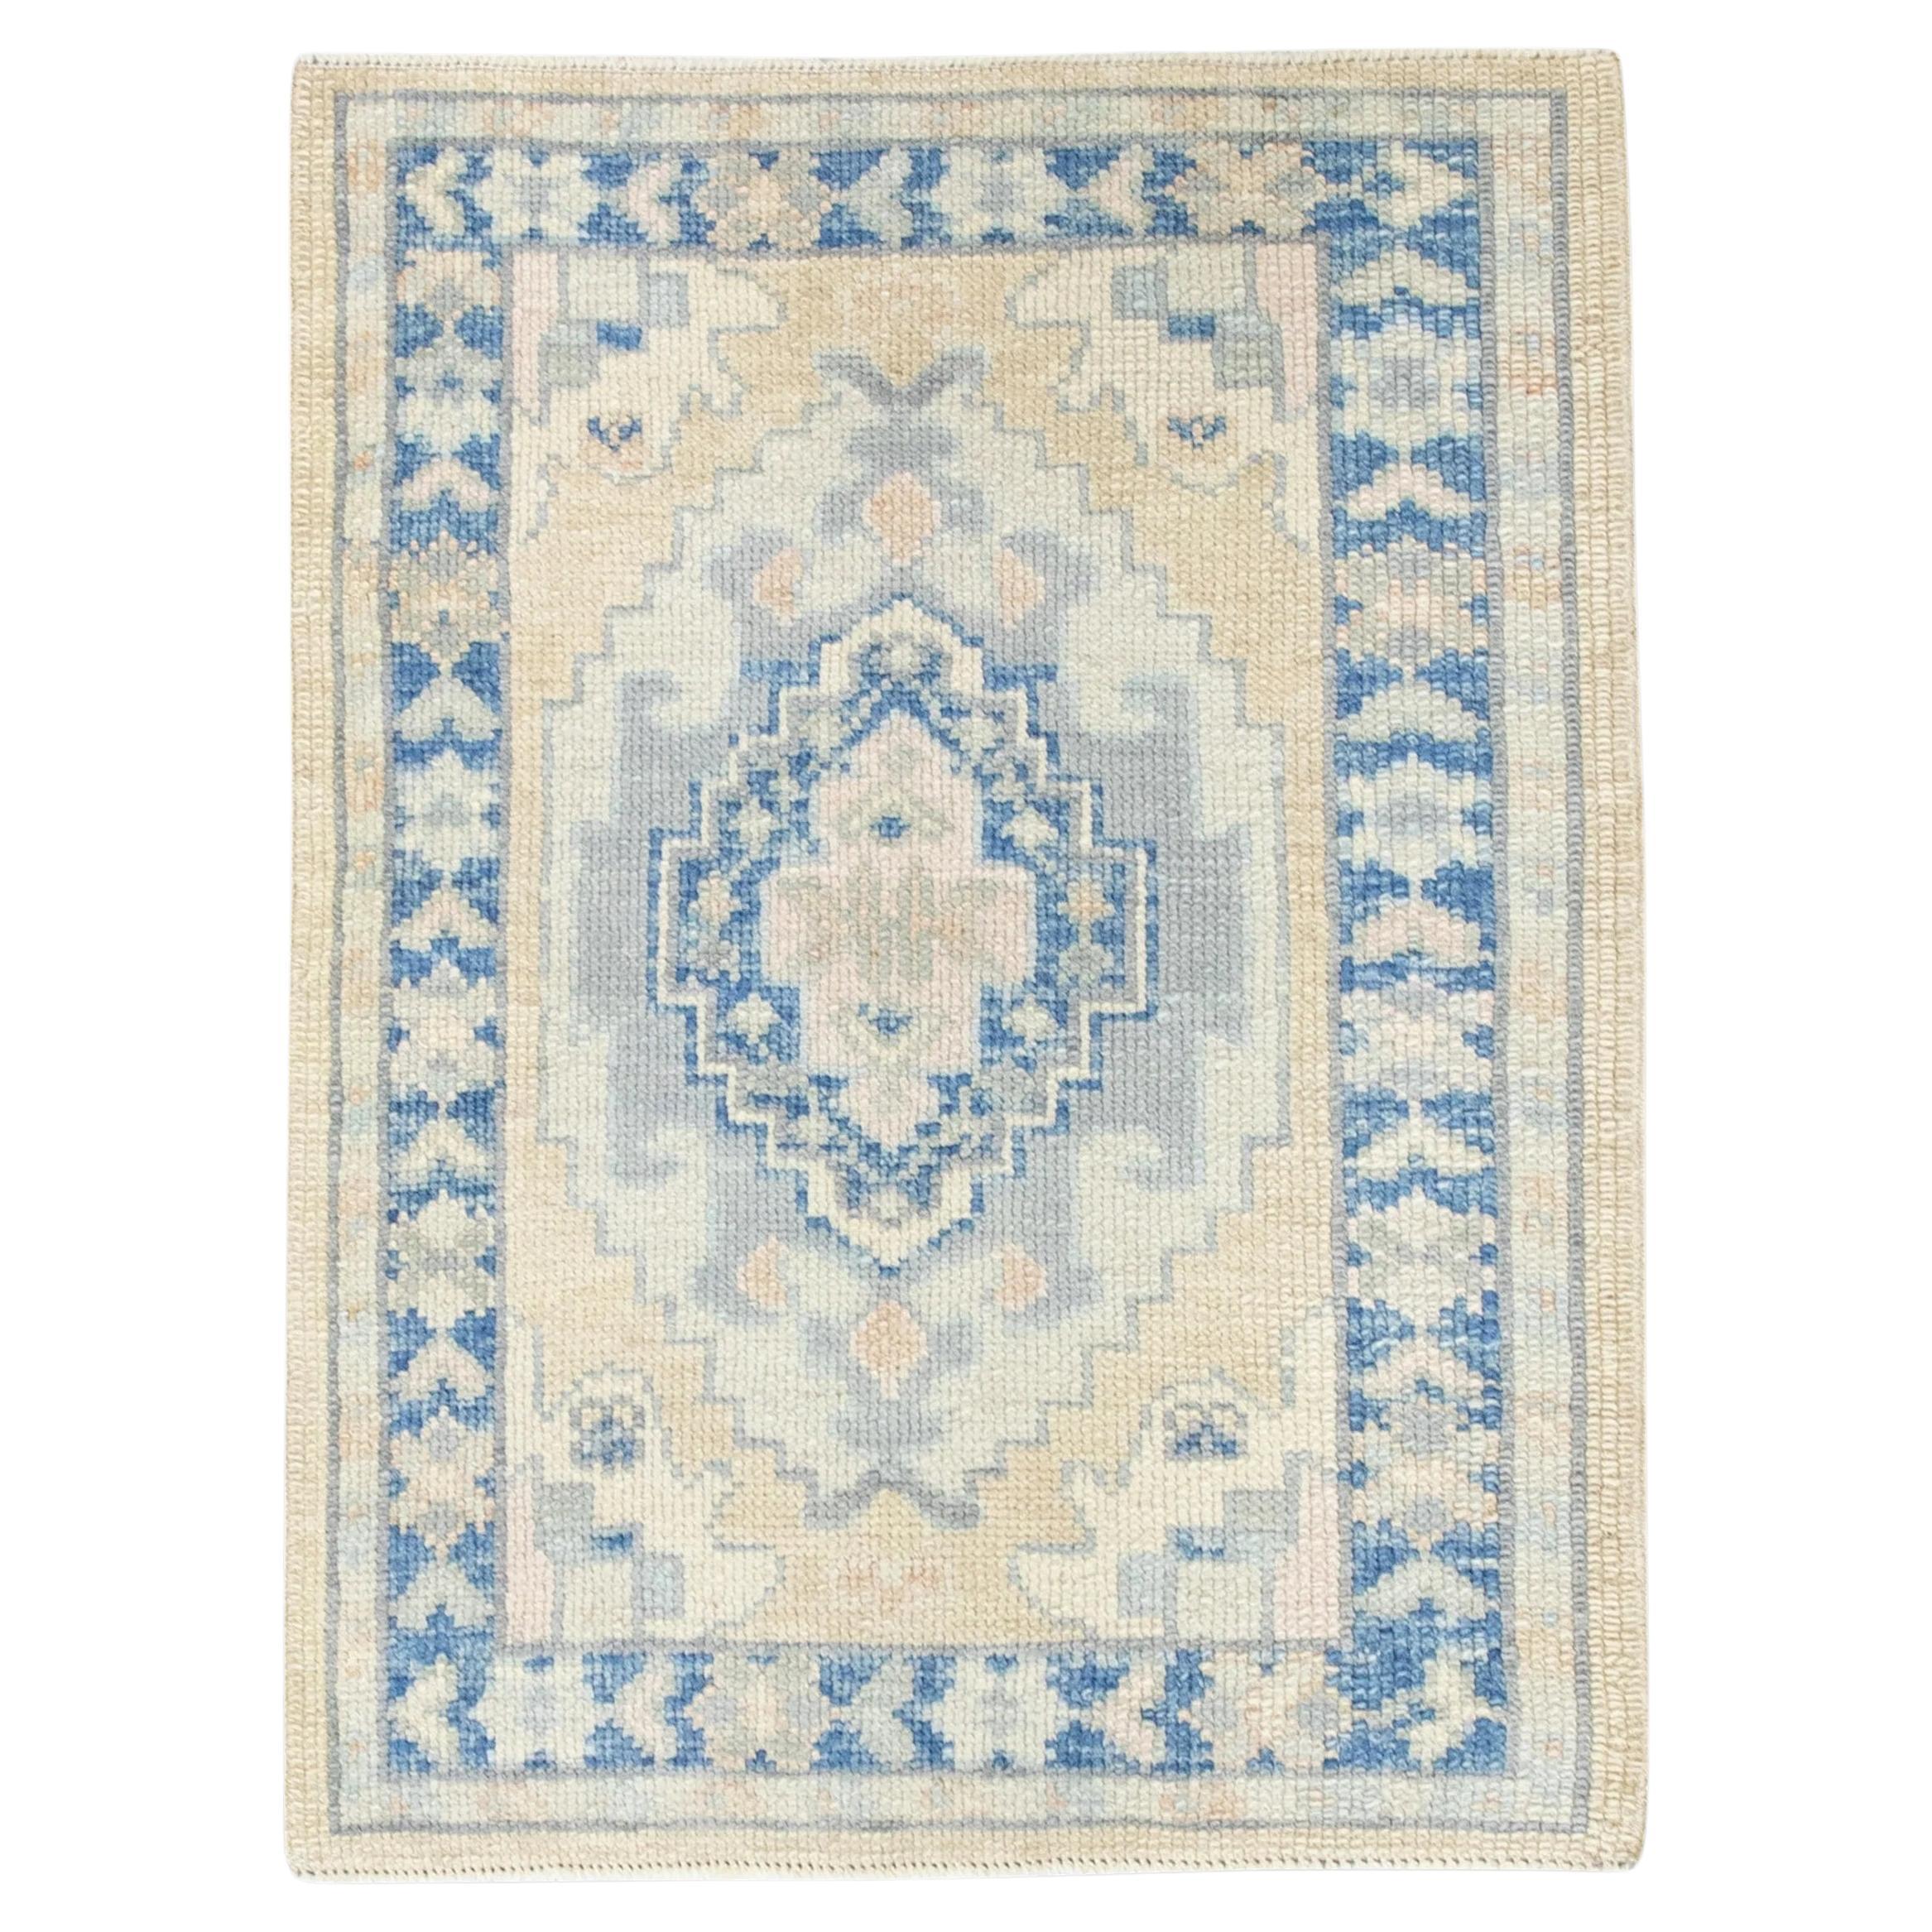 Blue and Yellow Geometric Design Handwoven Wool Turkish Oushak Rug 2'3" x 2'11" For Sale